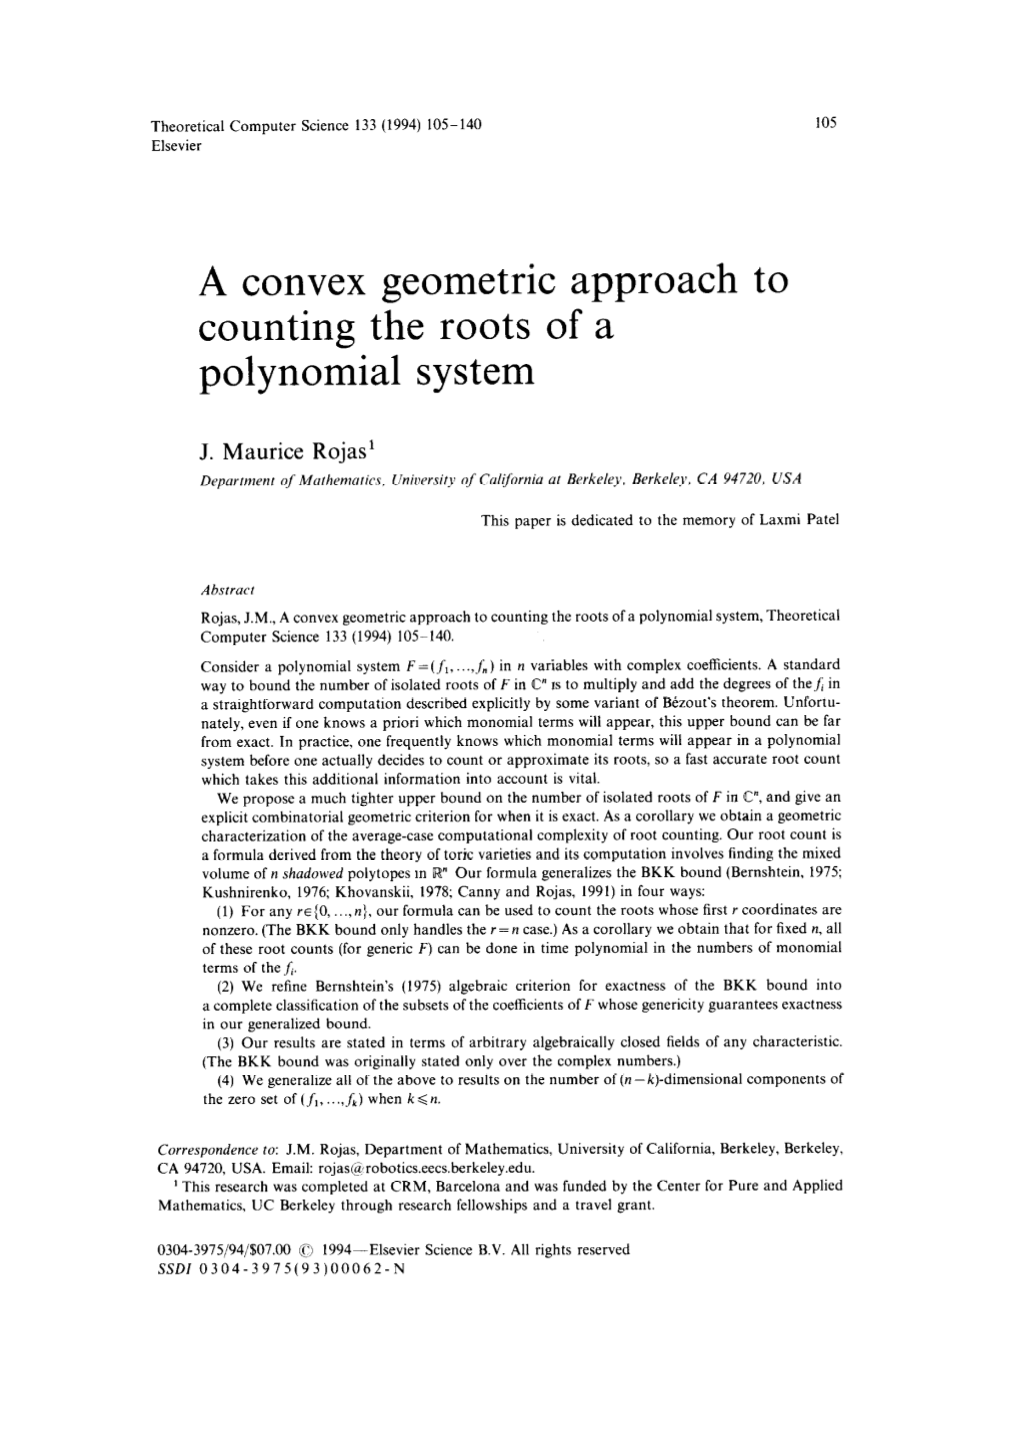 A Convex Geometric Approach to Counting the Roots of a Polynomial System